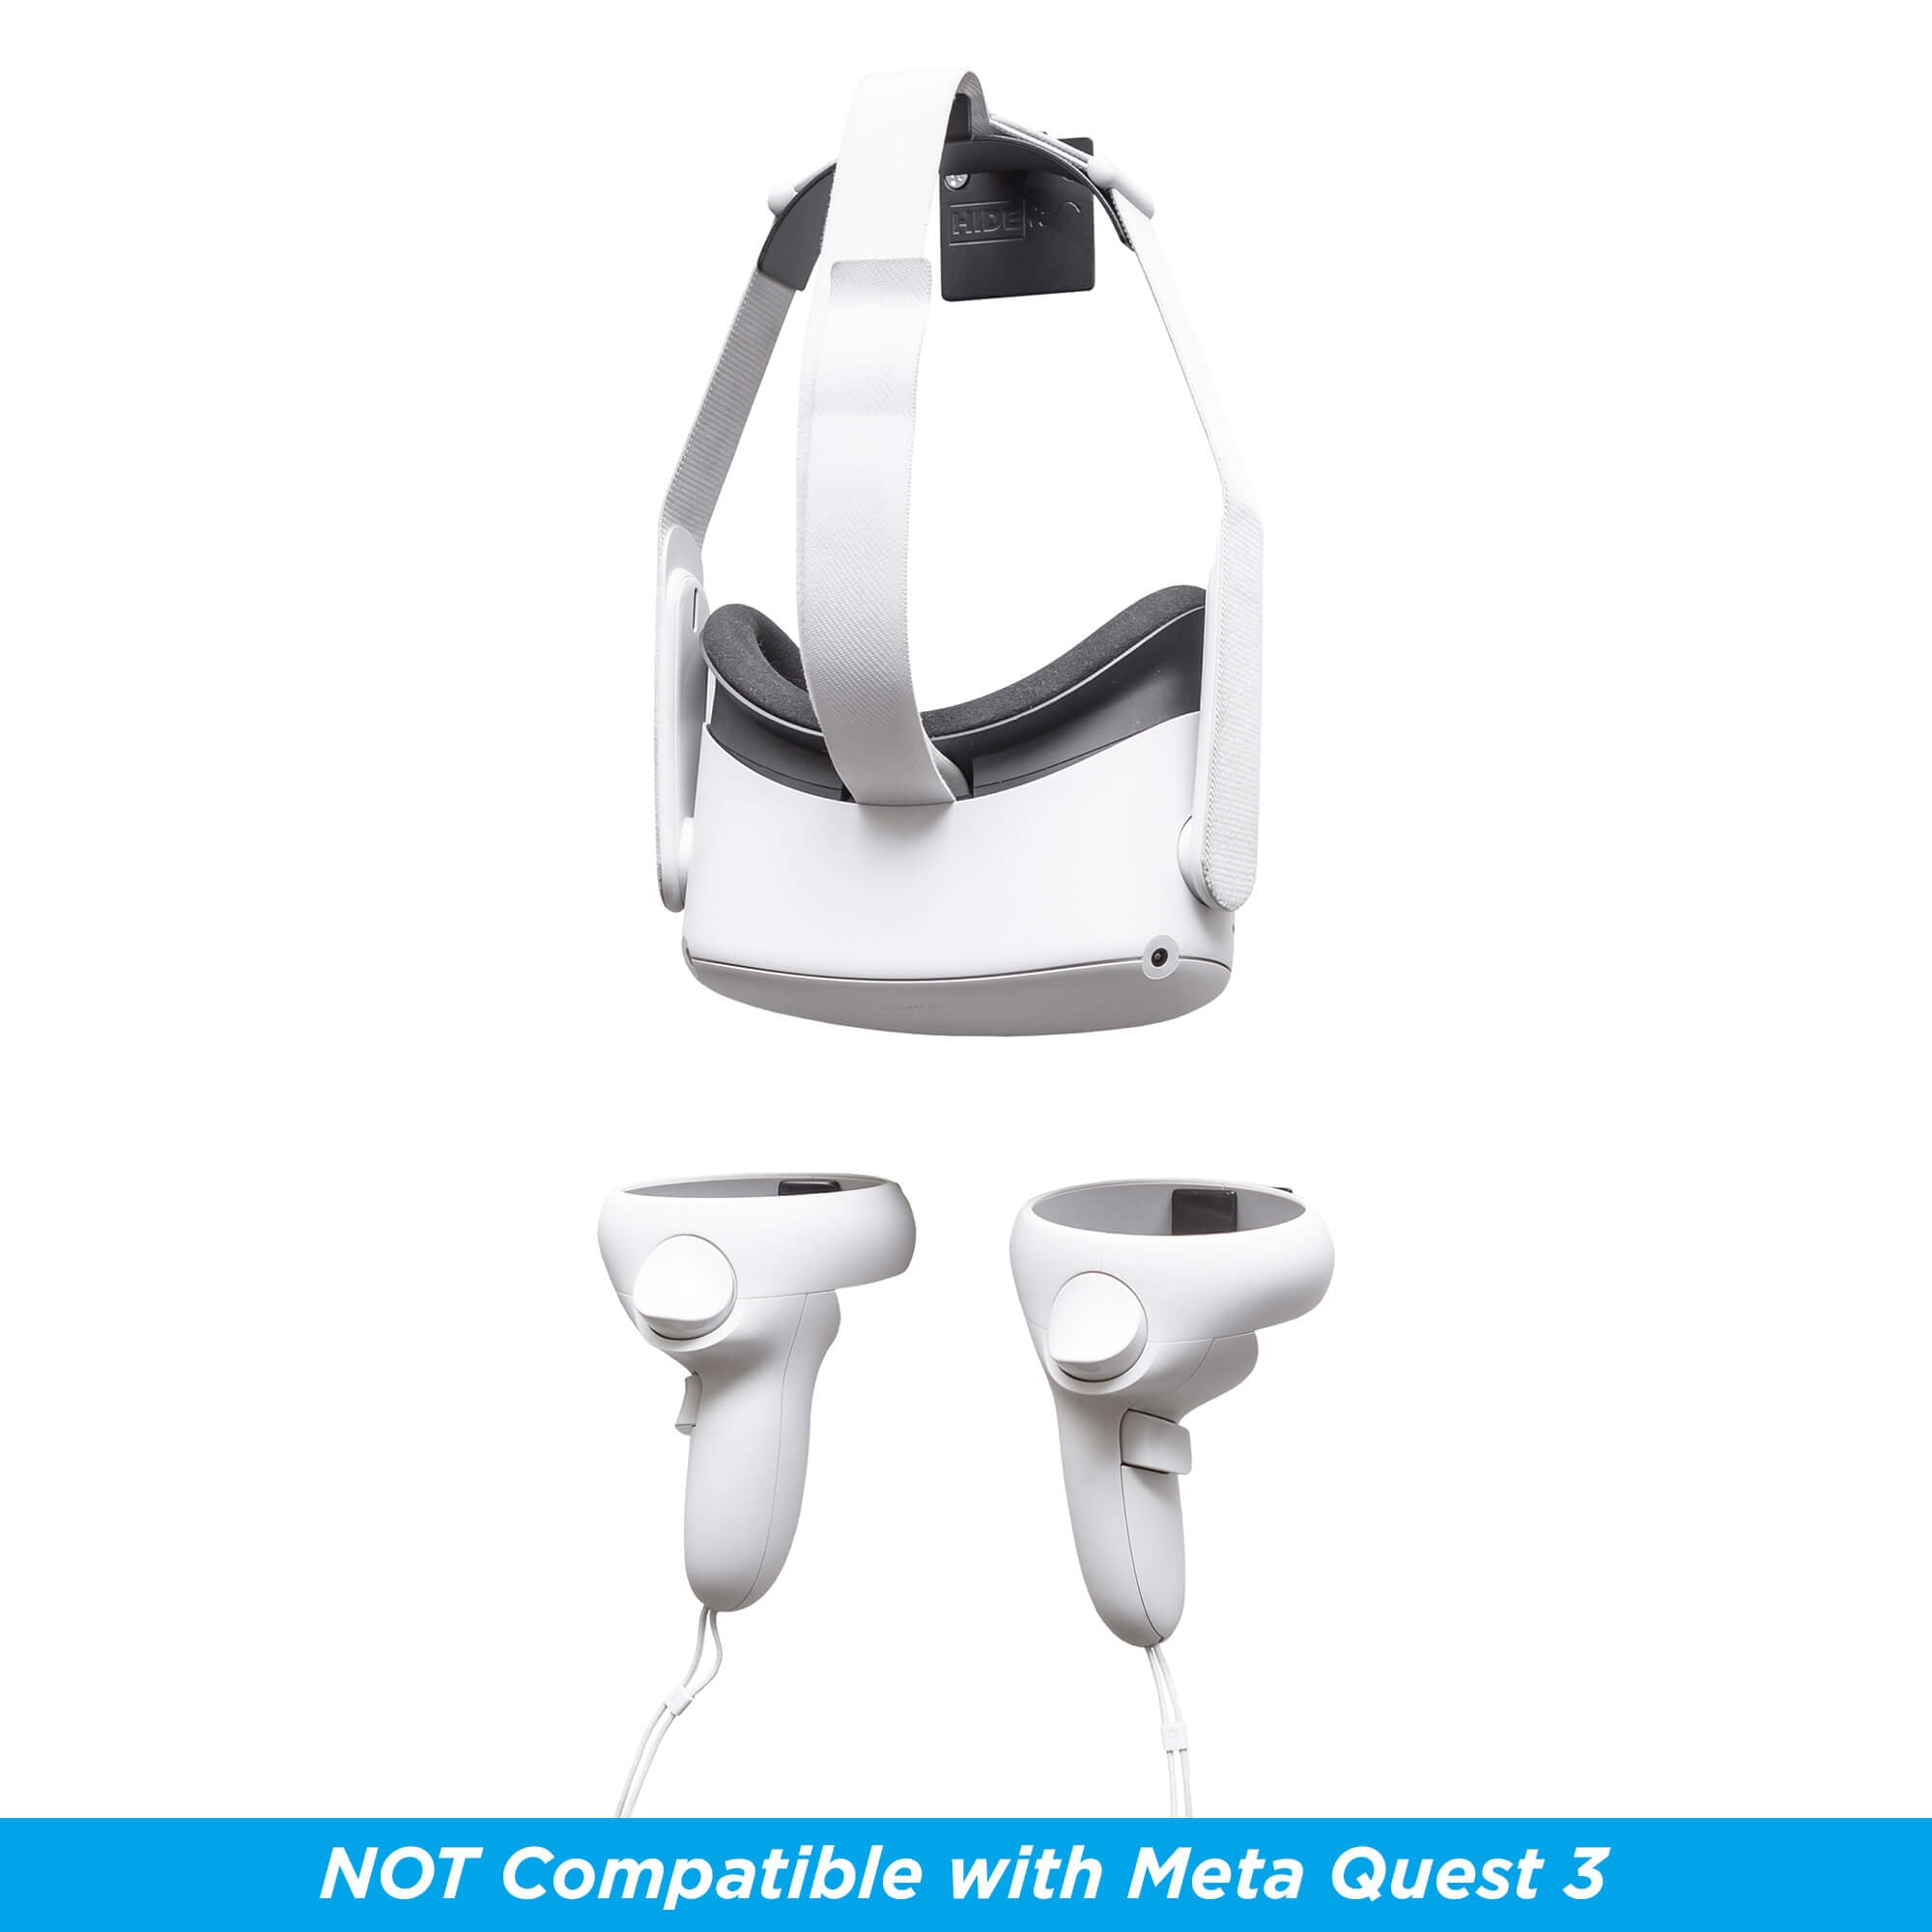 HIDEit Mounts Wall Mount Bundle for the Oculus Meta Quest 2 Virtual Reality Headset and Meta Quest 2 Controllers.